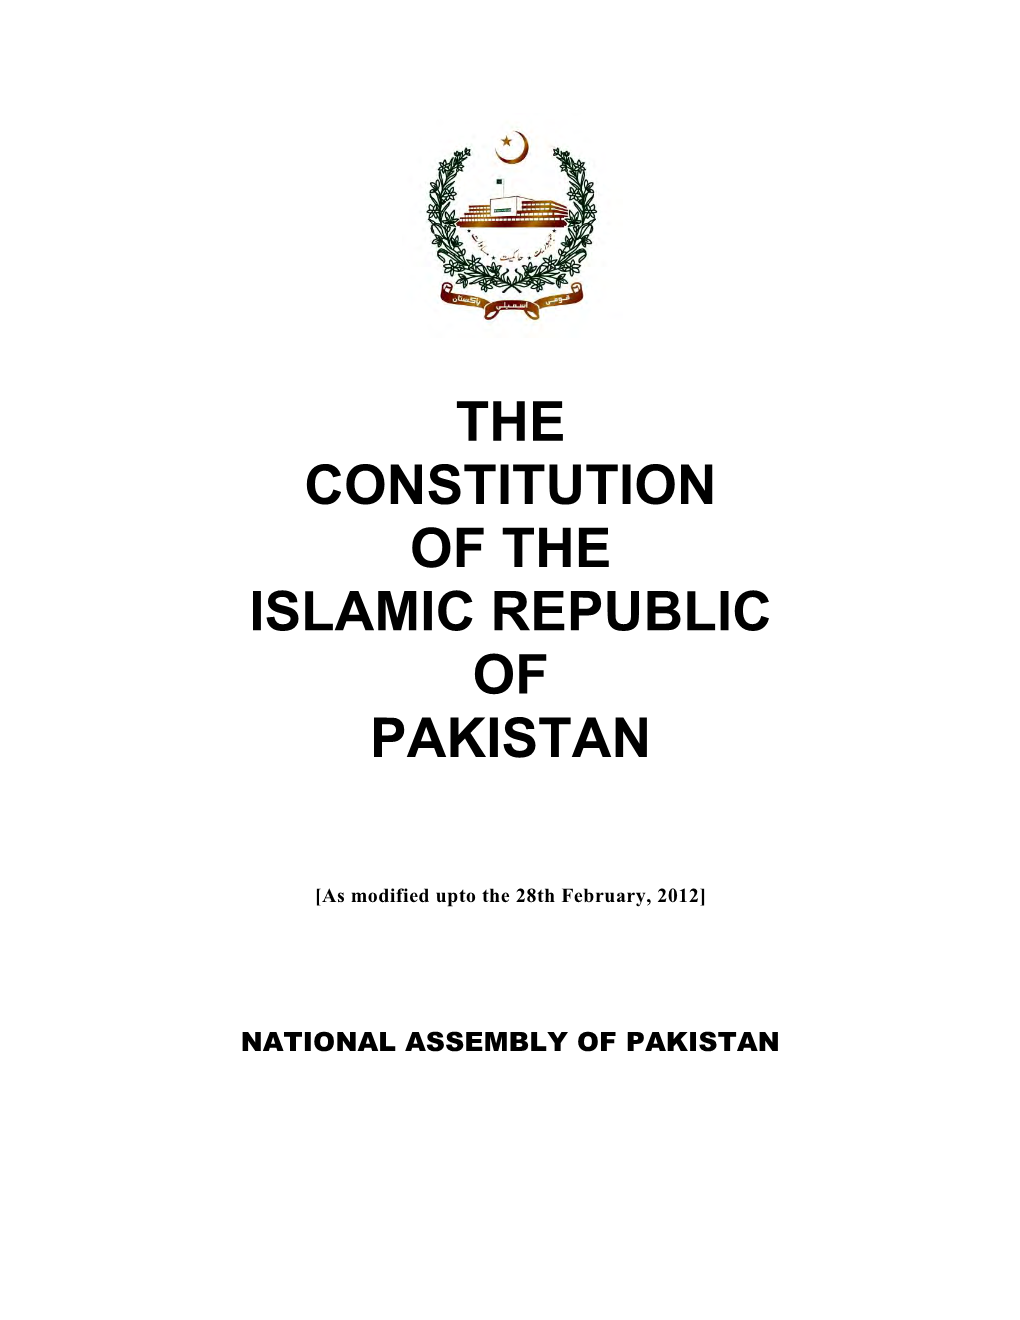 The Constitution of the Islamic Republic of Pakistan